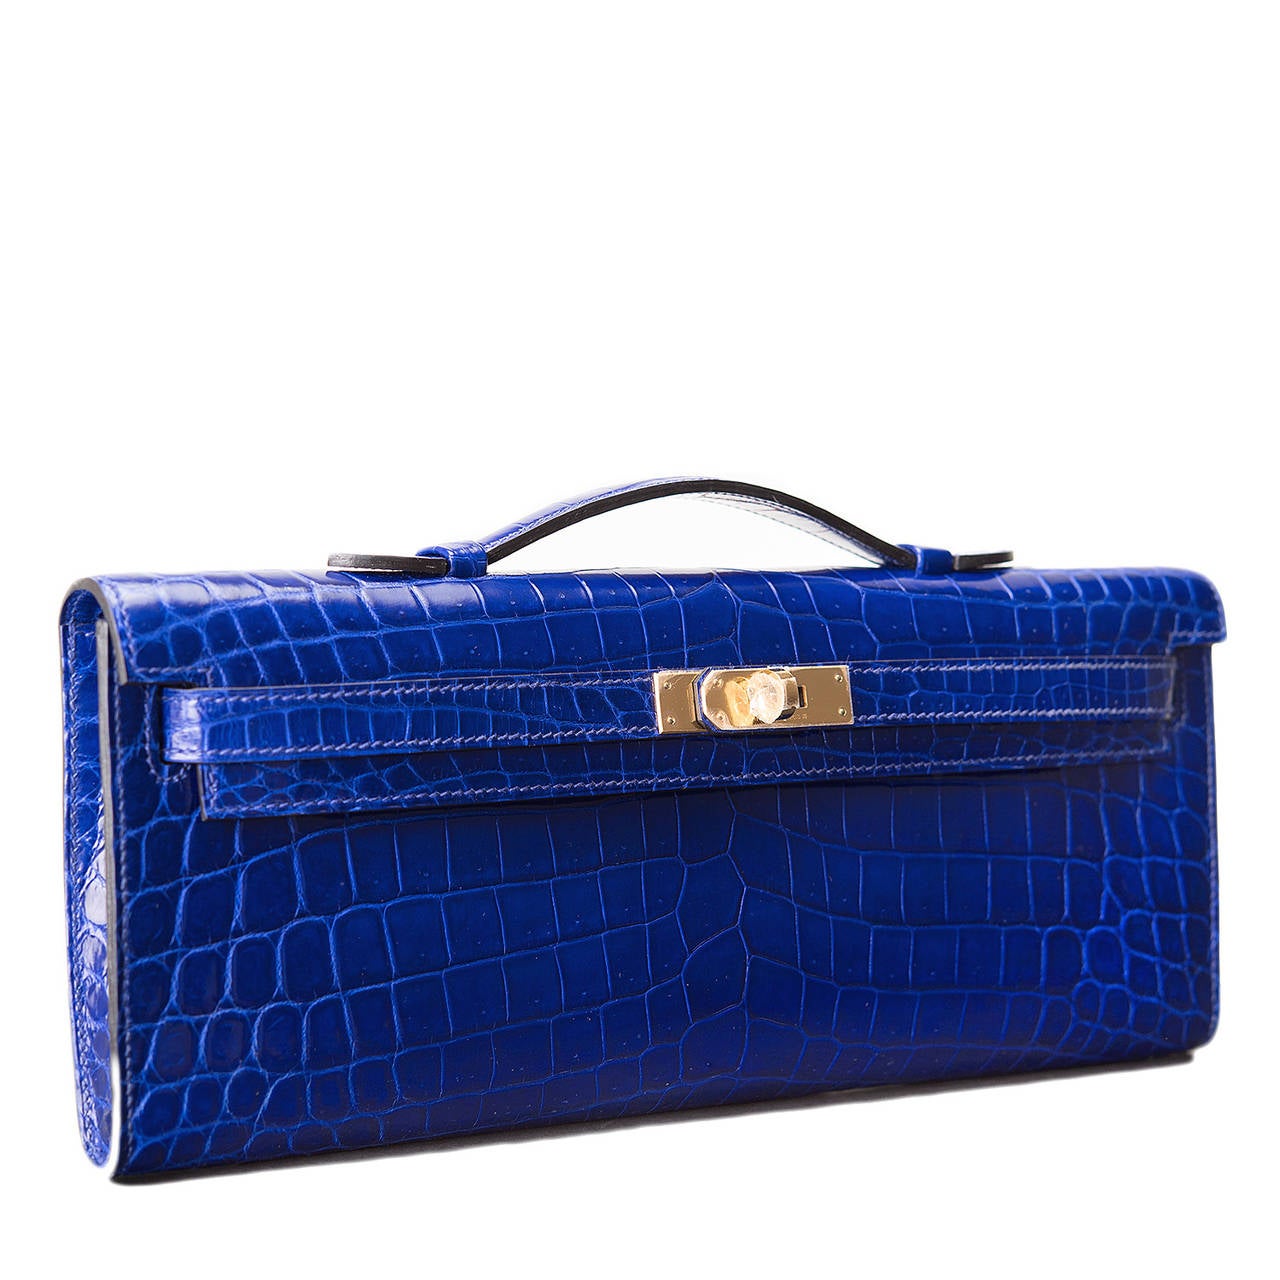 This exotic Kelly Cut of Blue Electric shiny Niloticus crocodile is a gorgeous treasure, paired with complimenting gold hardware; the bag has tonal stitching, front straps with toggle closure and a top flat handle.

The interior is lined in Blue